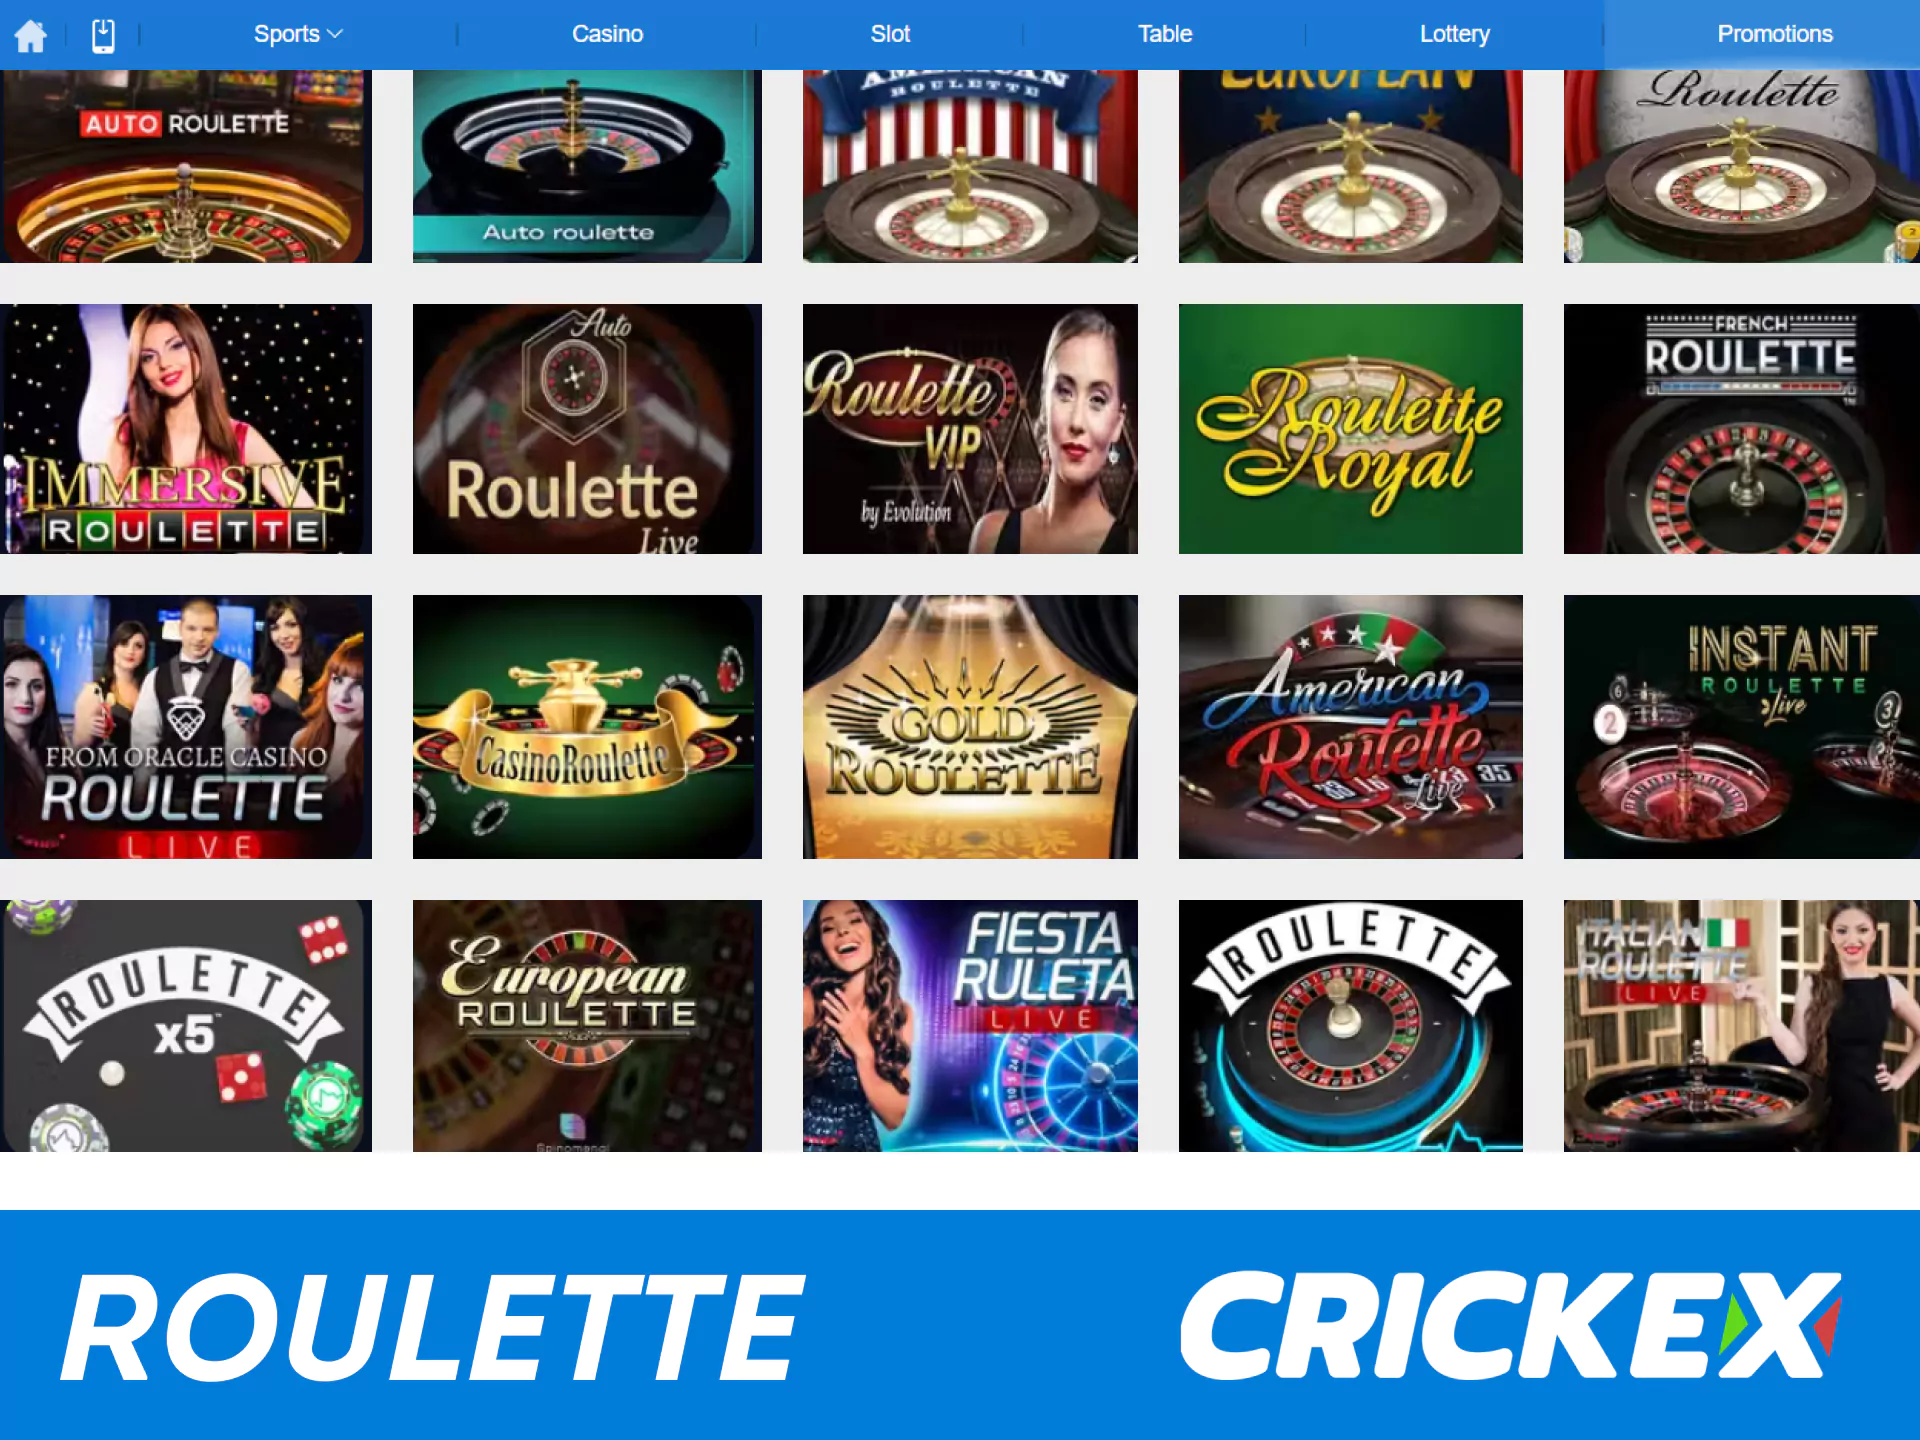 For casino games, choose roulette from Crickex.